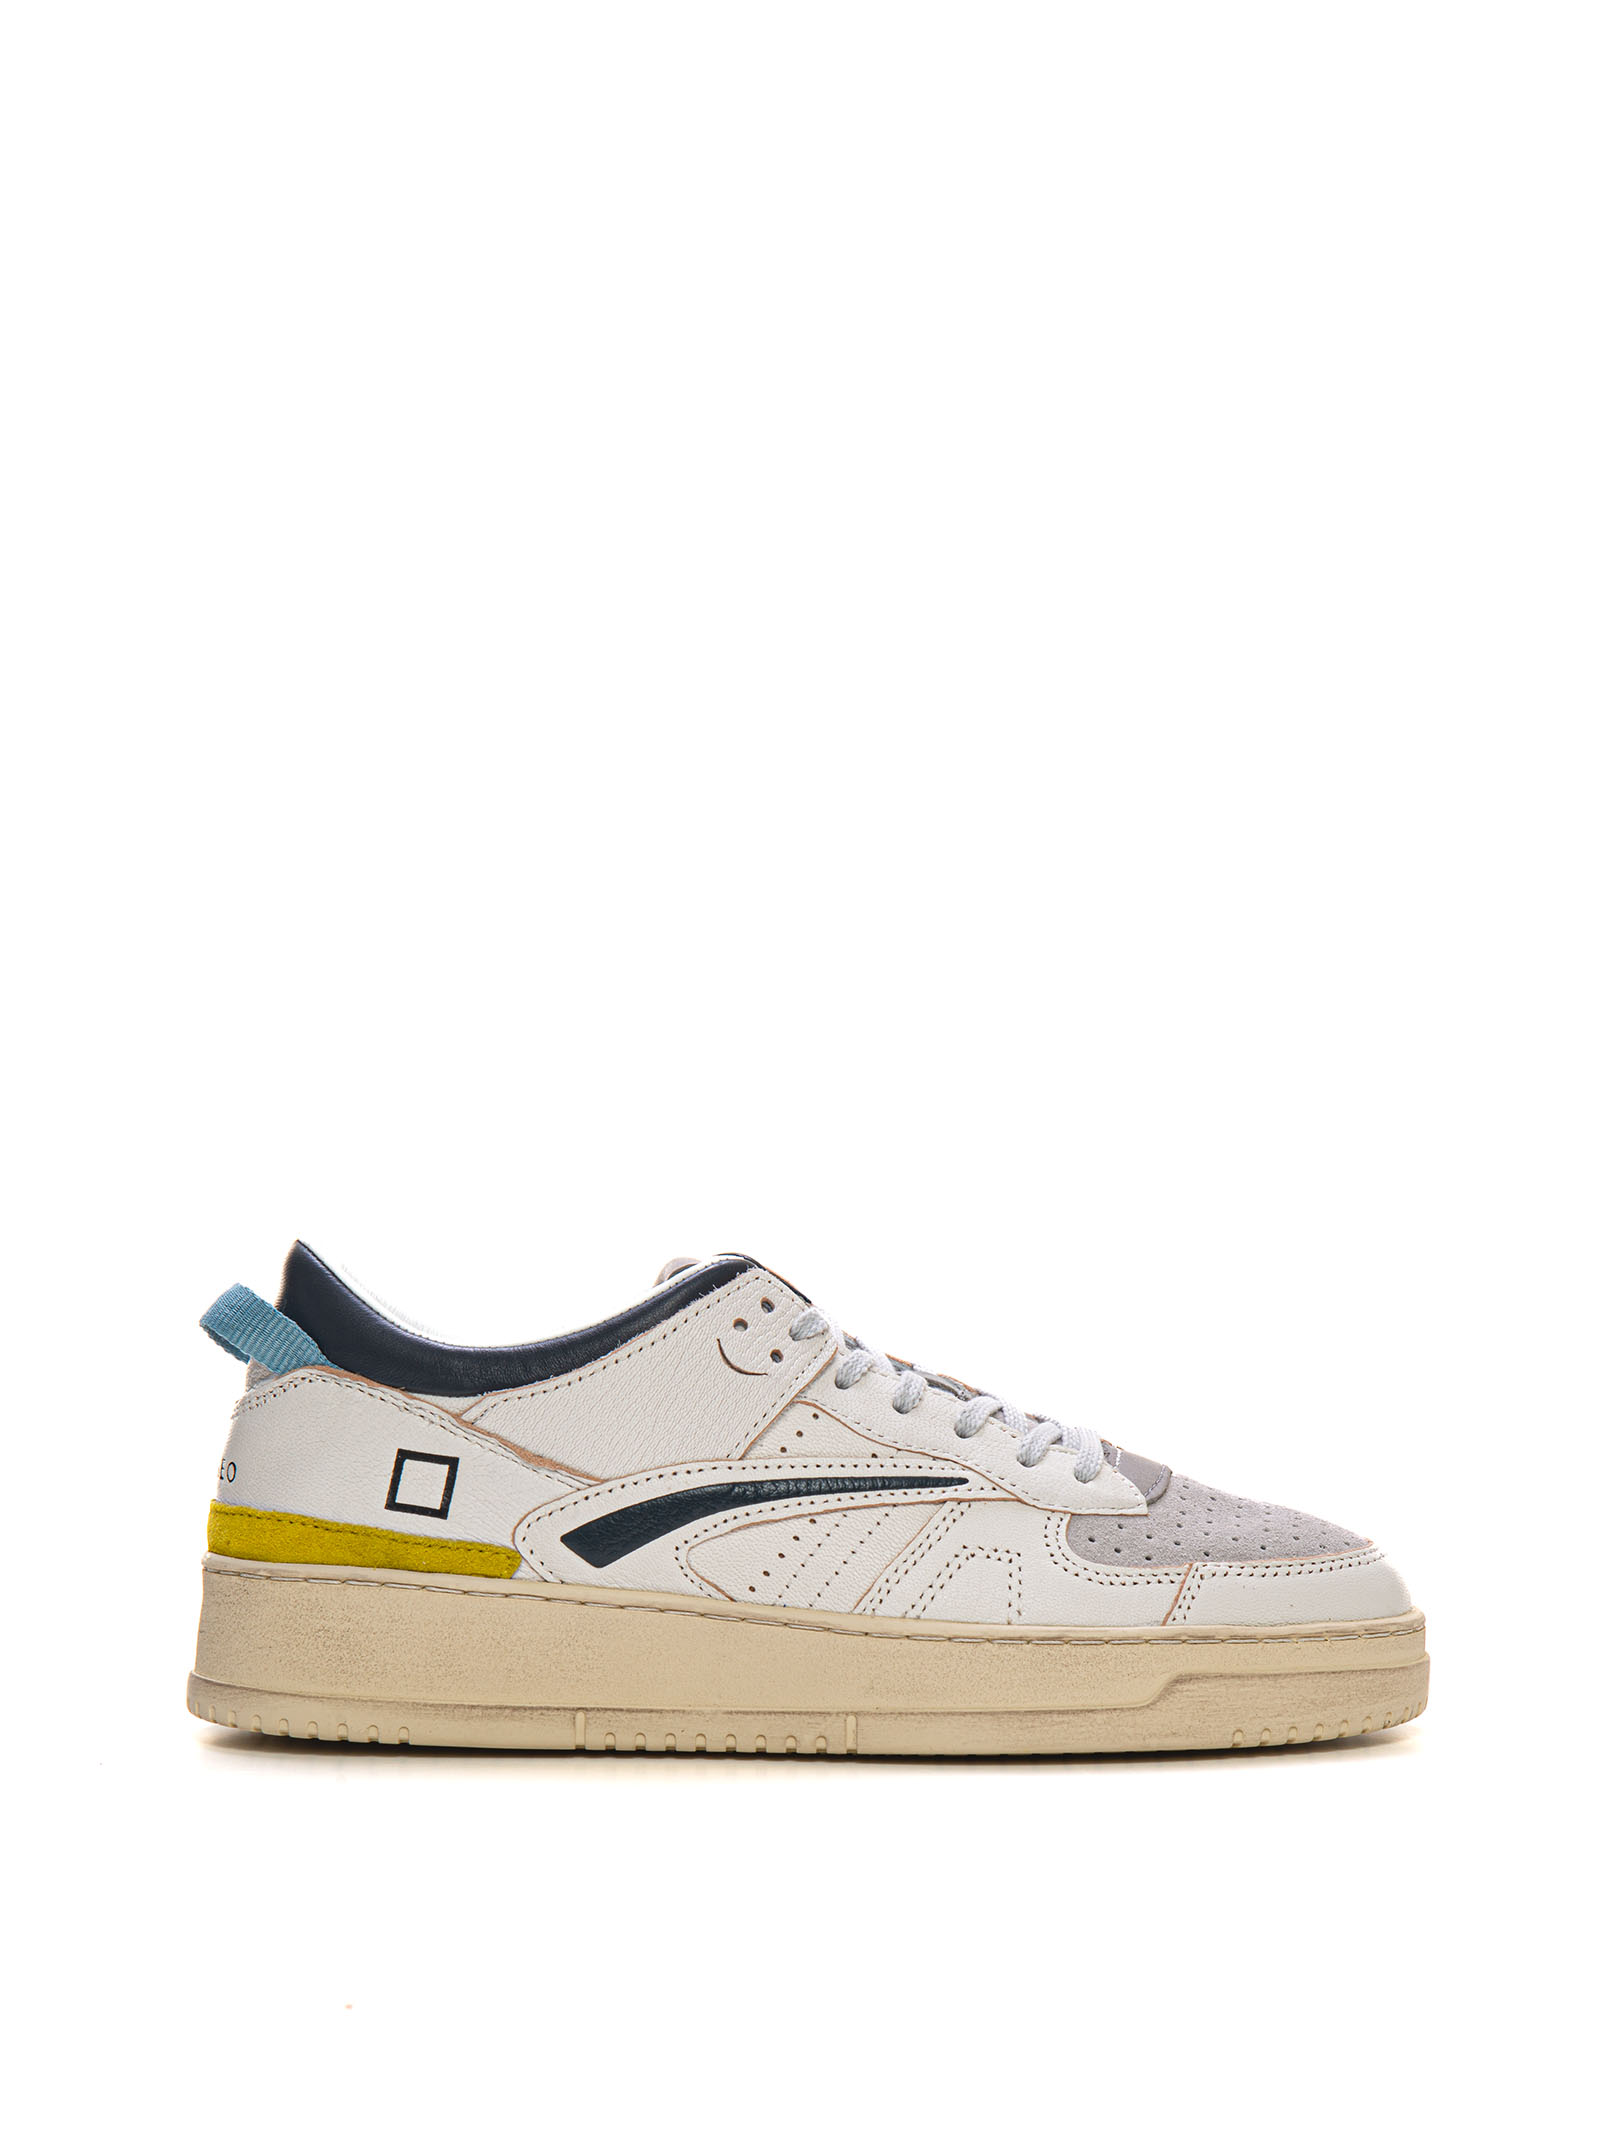 Shop Date Torneo Leather Sneakers With Laces In White/grey